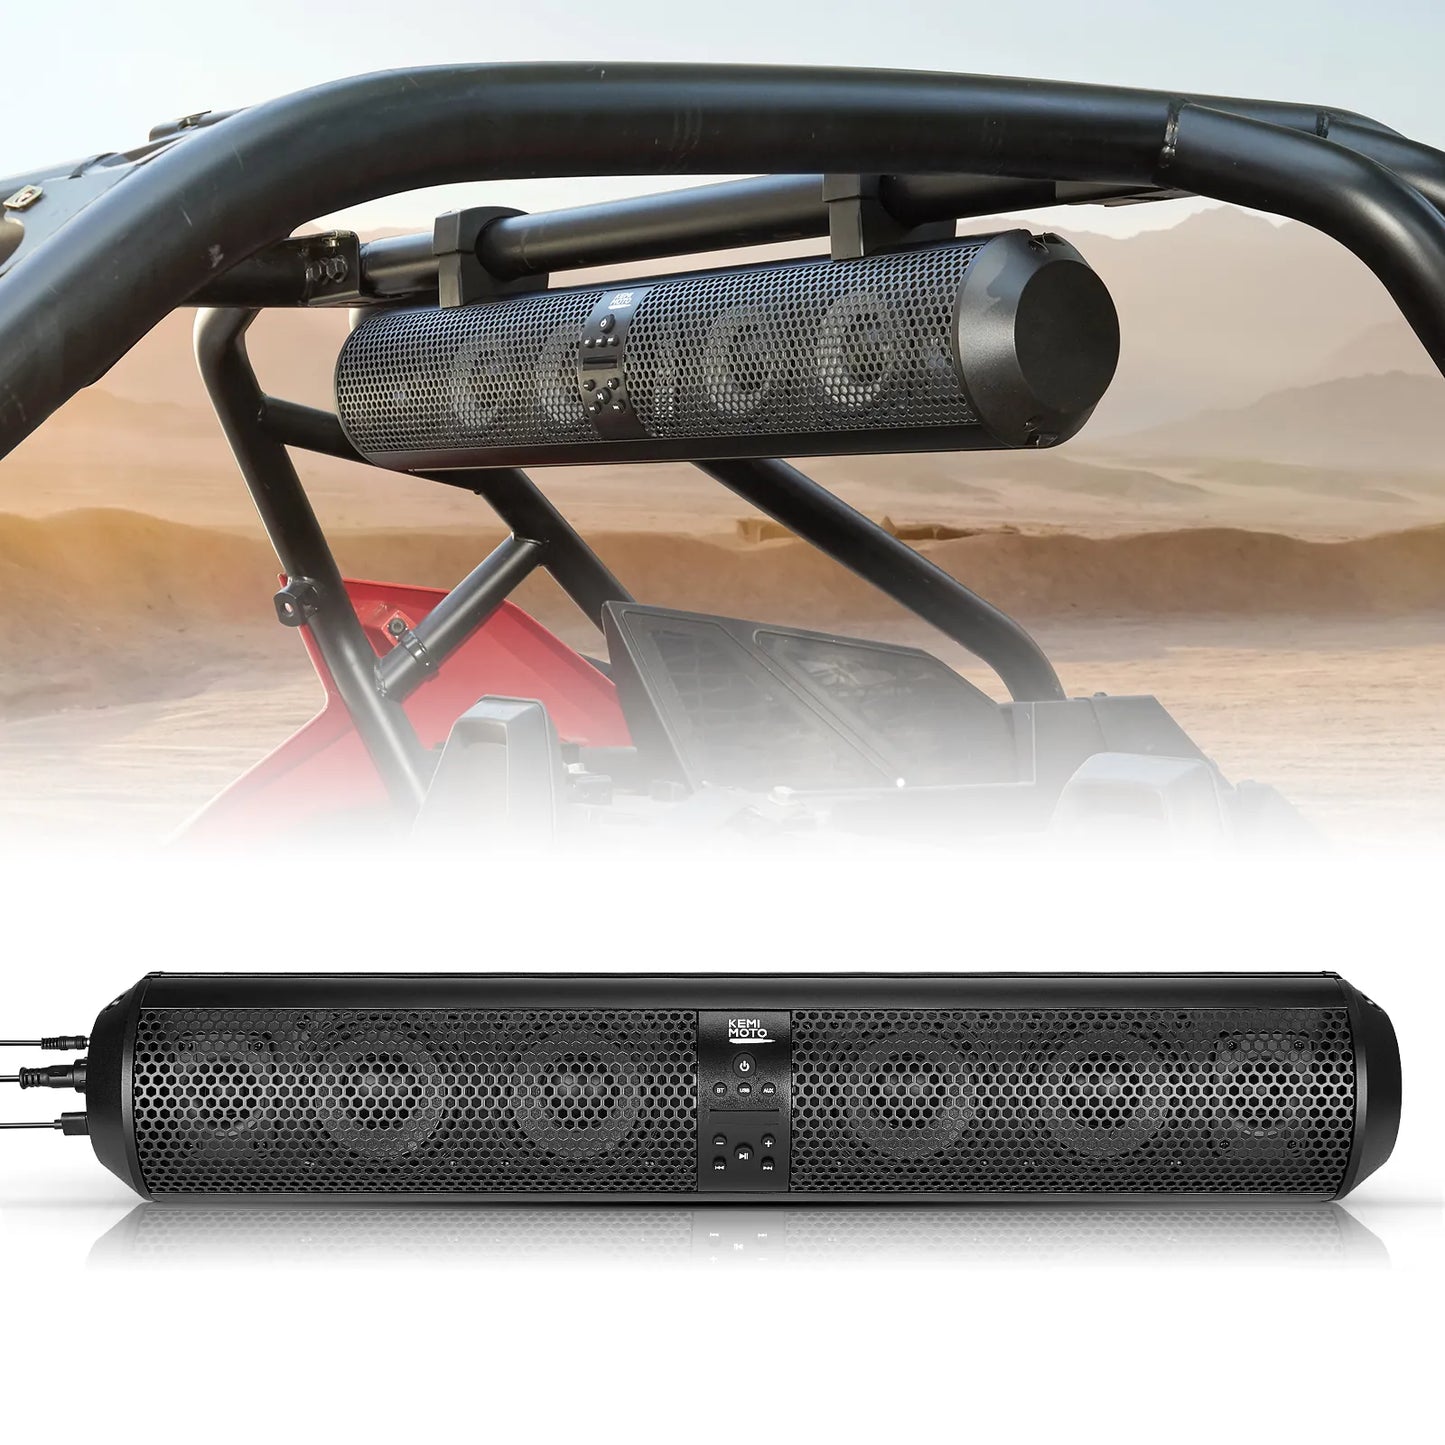 UTV Bluetooth Speakers Remote Control 1.56-2.25" Compatible with Polaris RZR 800 900 1000 XP For Can-Am Maverick X3 For Cfmoto